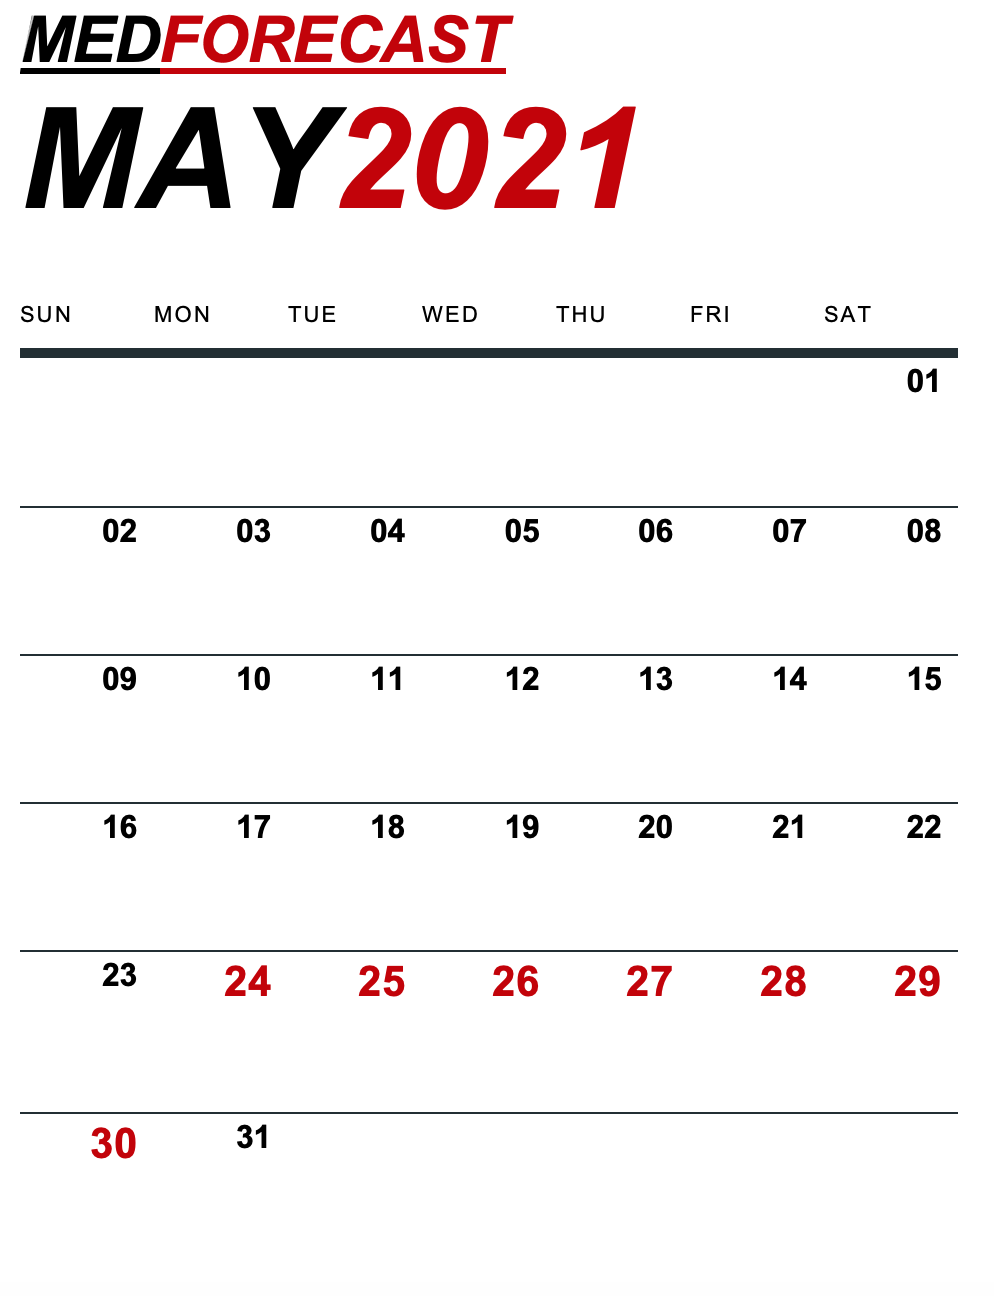 Medical News Forecast for May 24-30